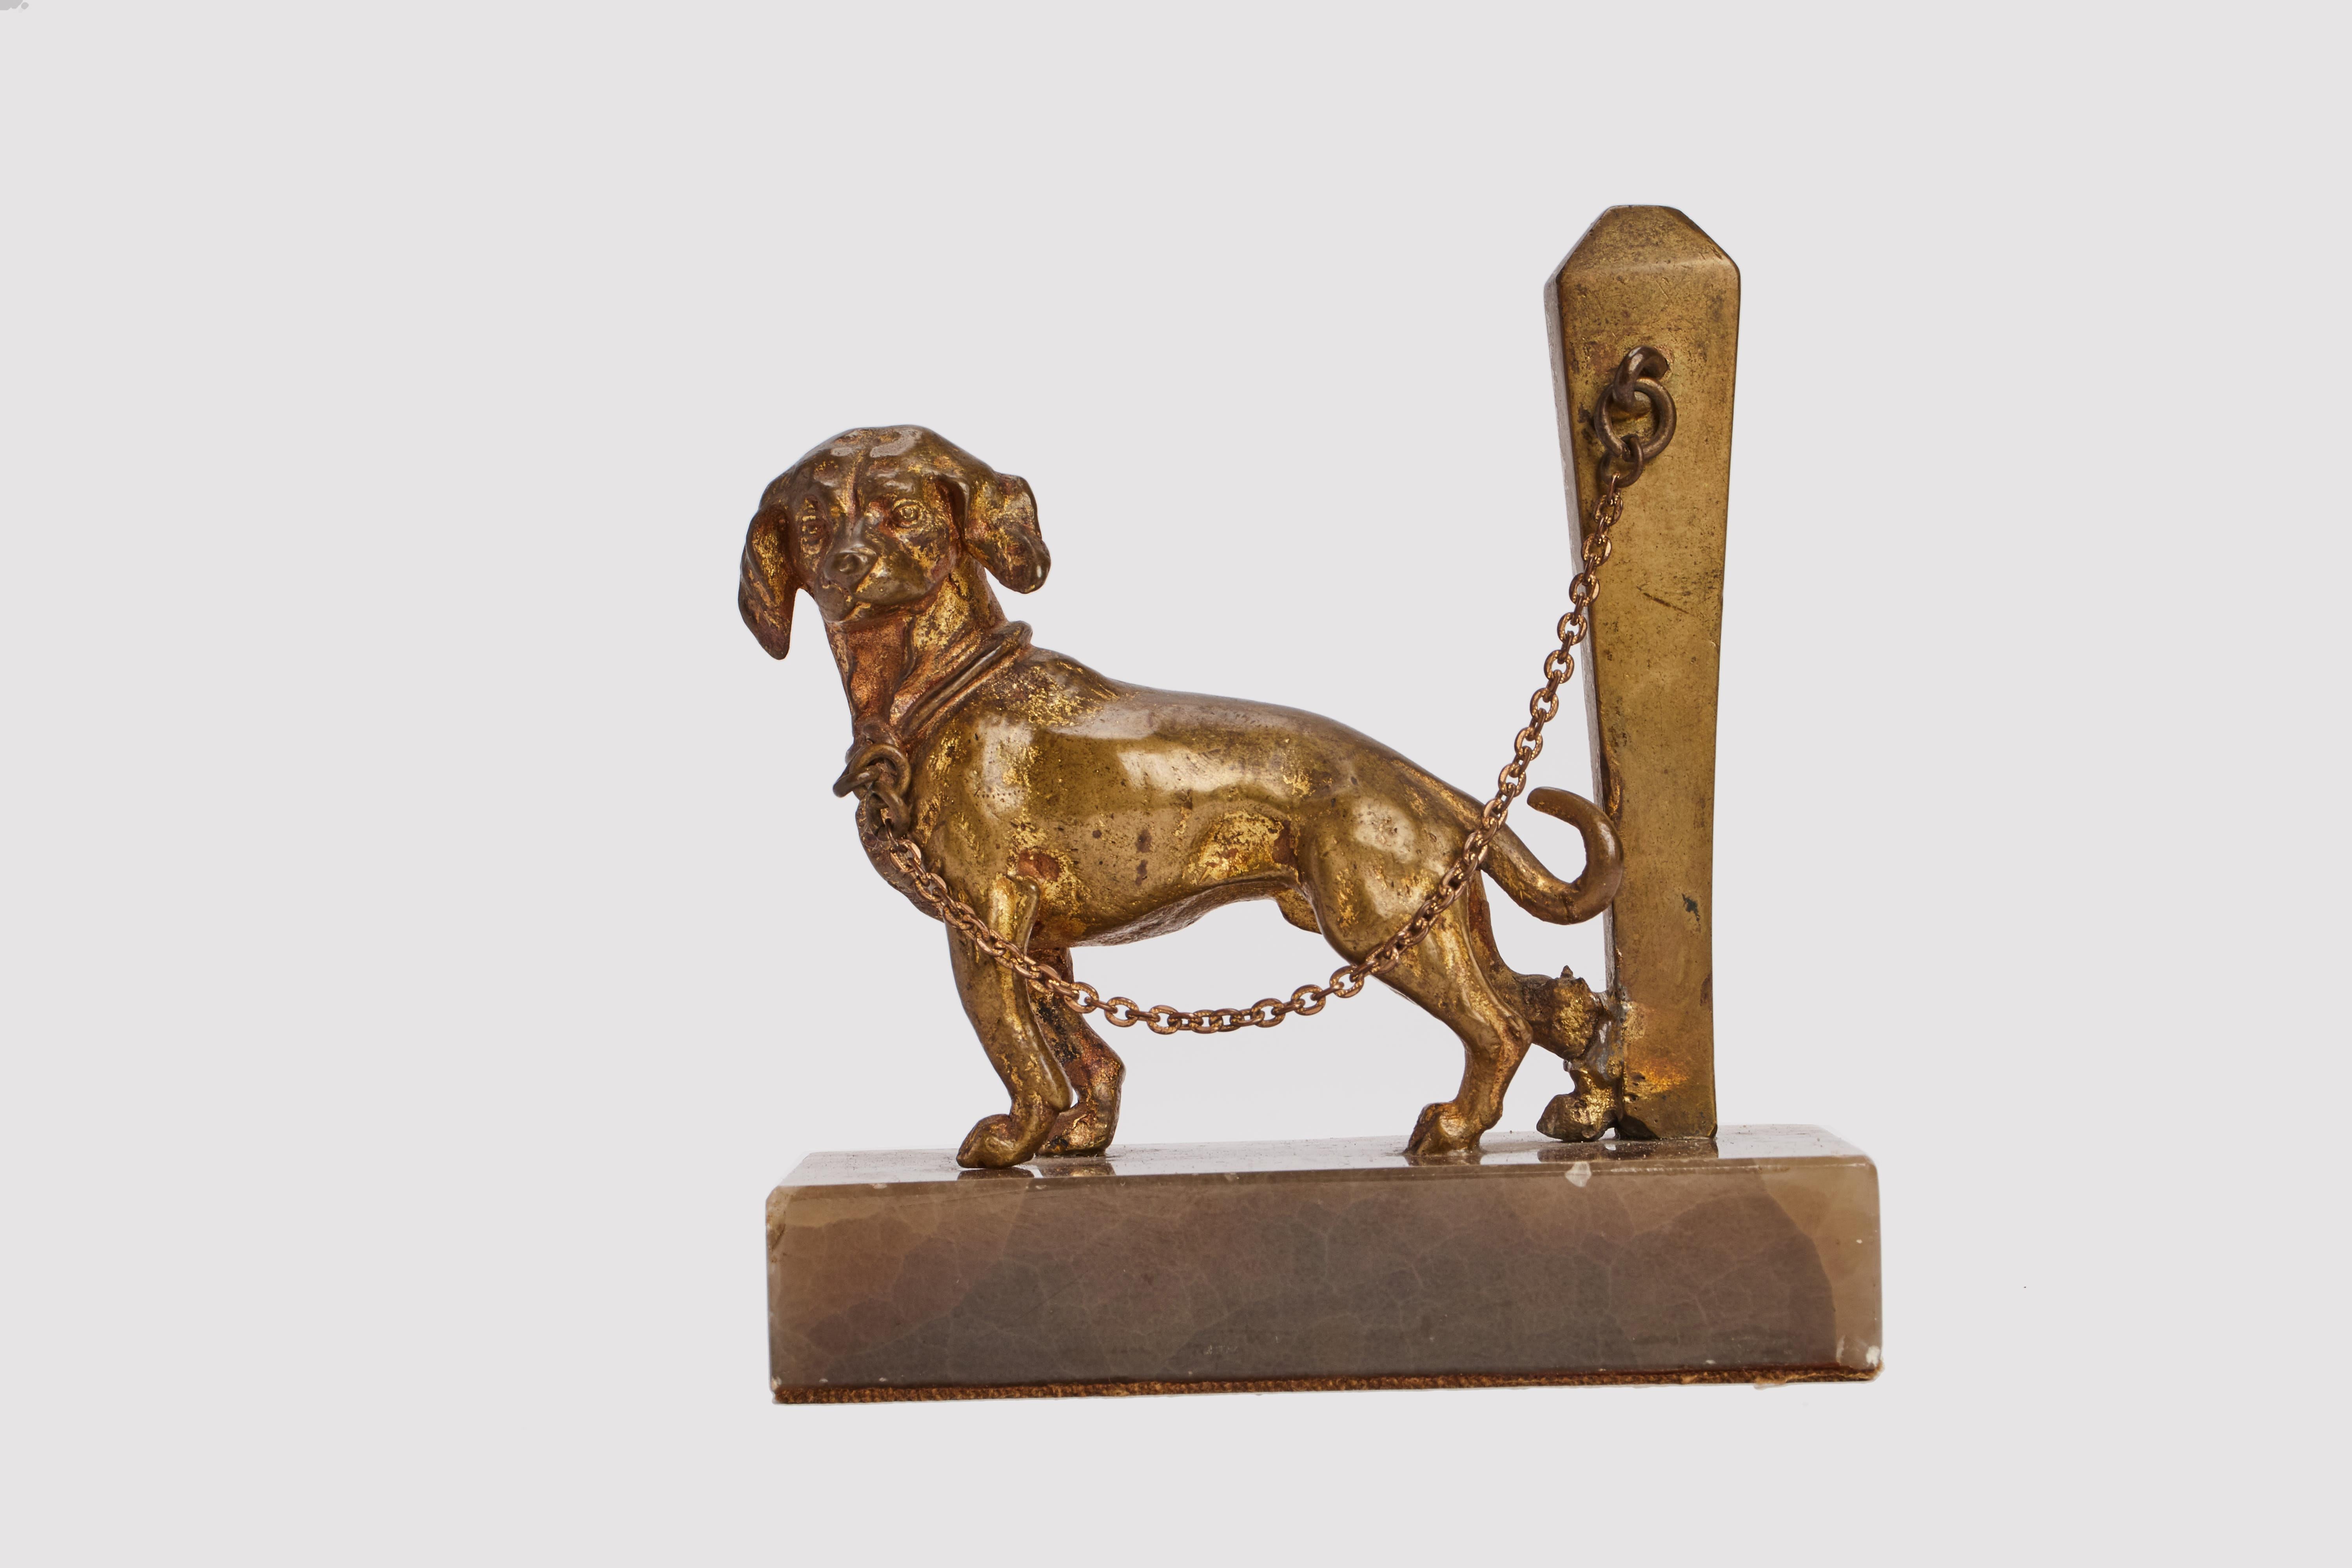 Small gilded bronze sculpture depicting a dog chained. Marble base. France circa 1890.